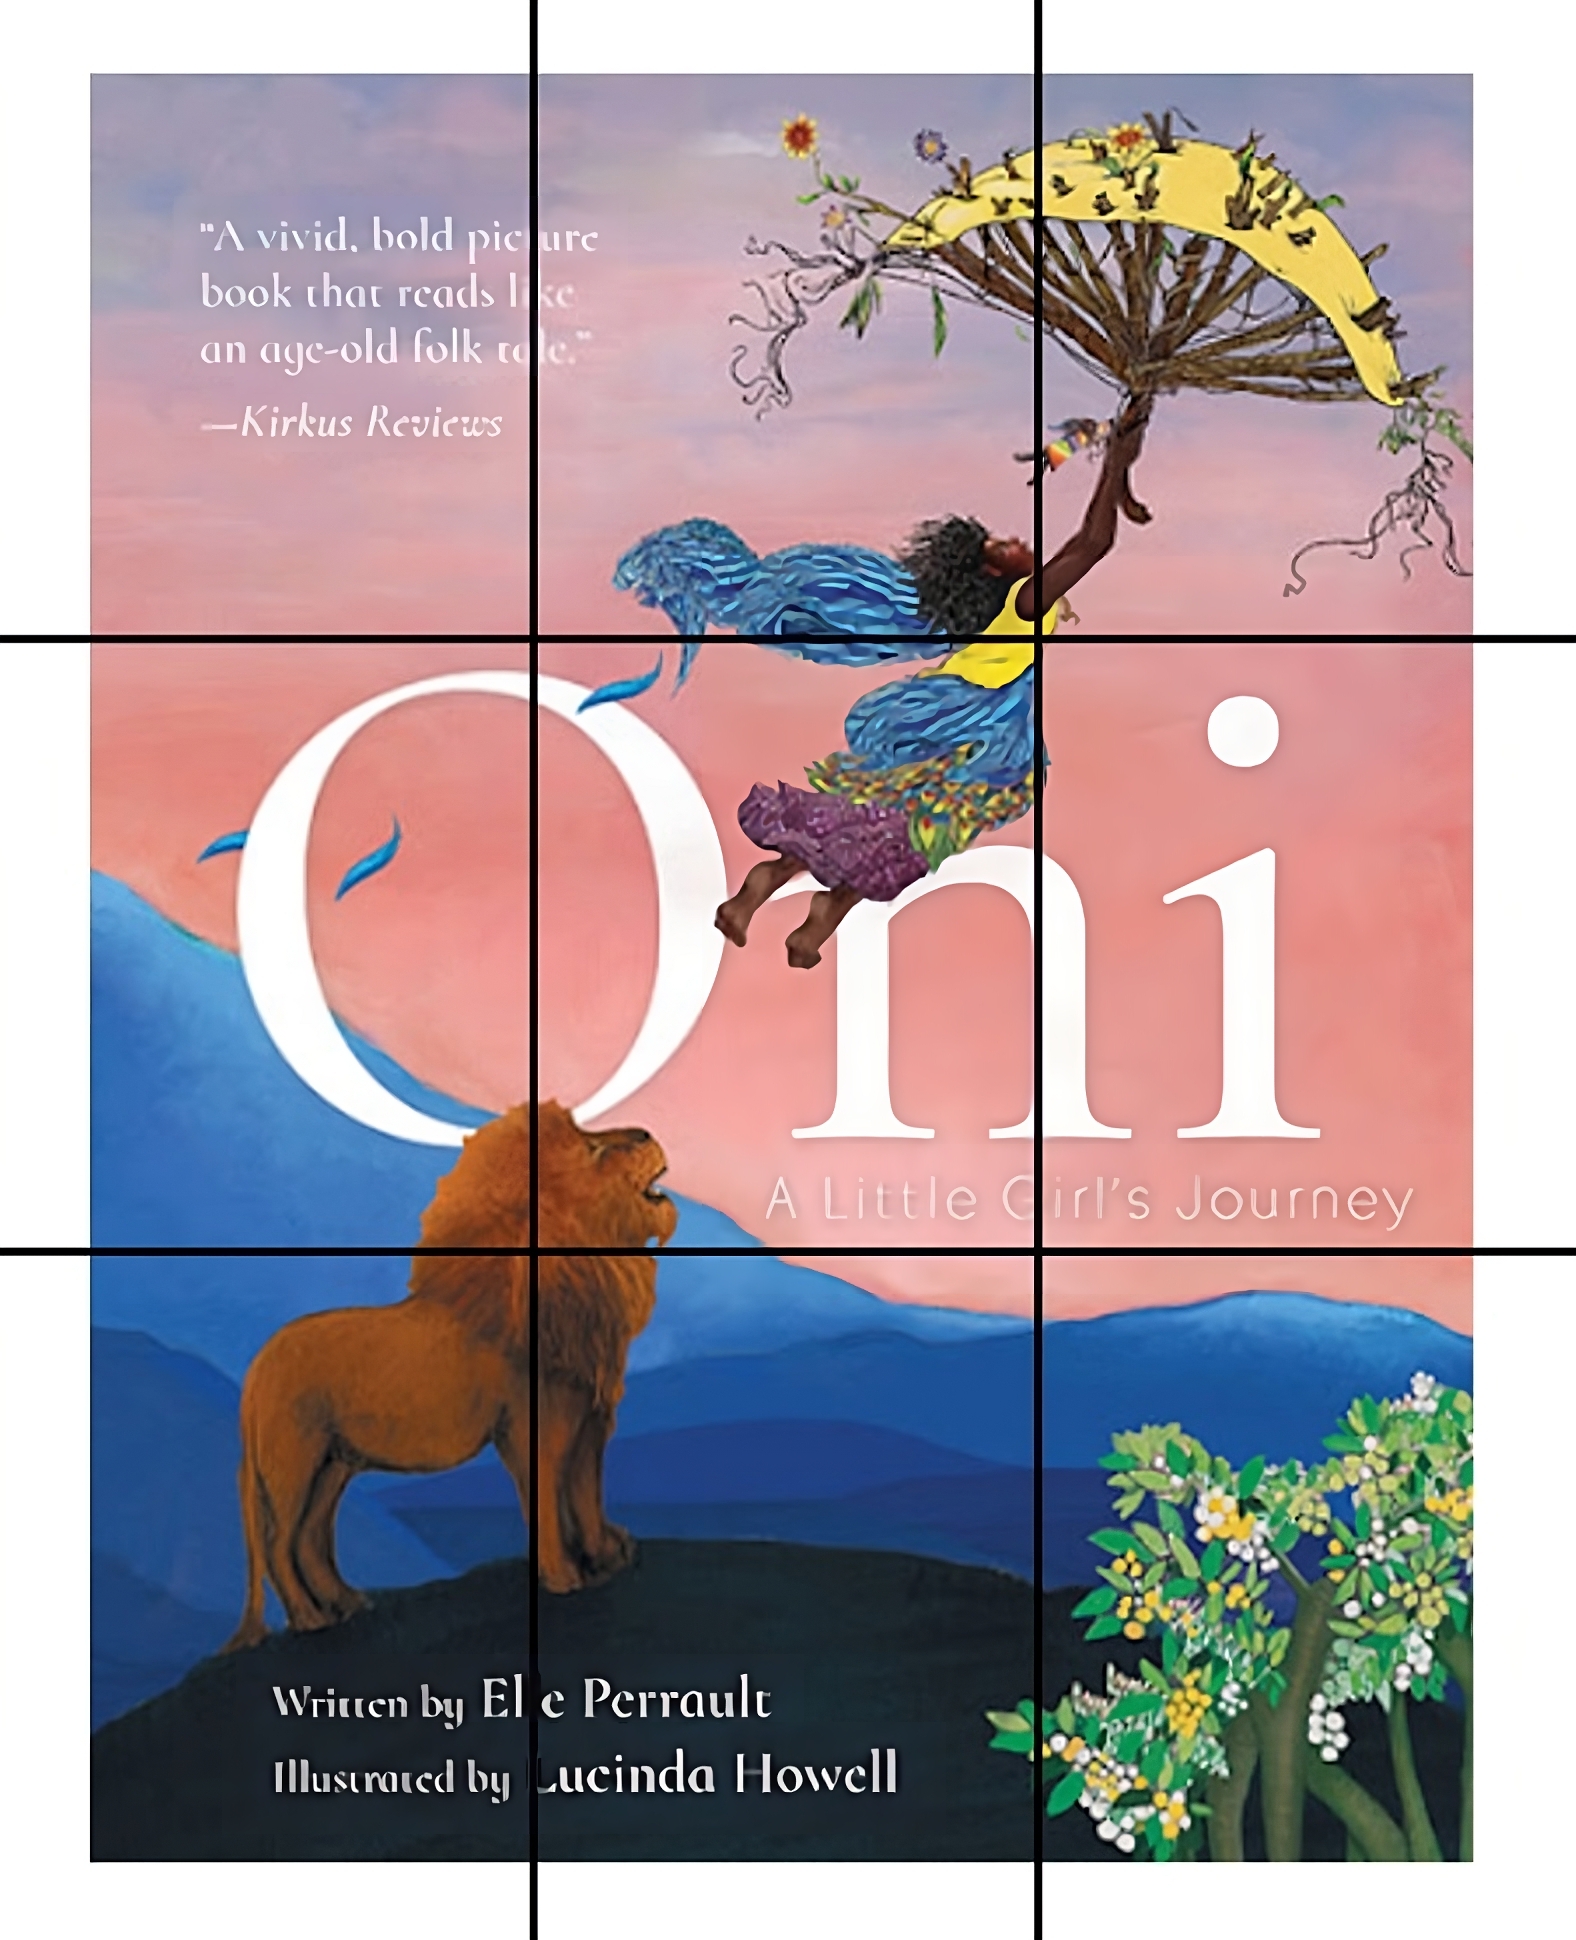 "Oni A Little Girl's Journey" Children's book cover illustrated by book cover artist Lucinda Howell and written by Elle Perrault.